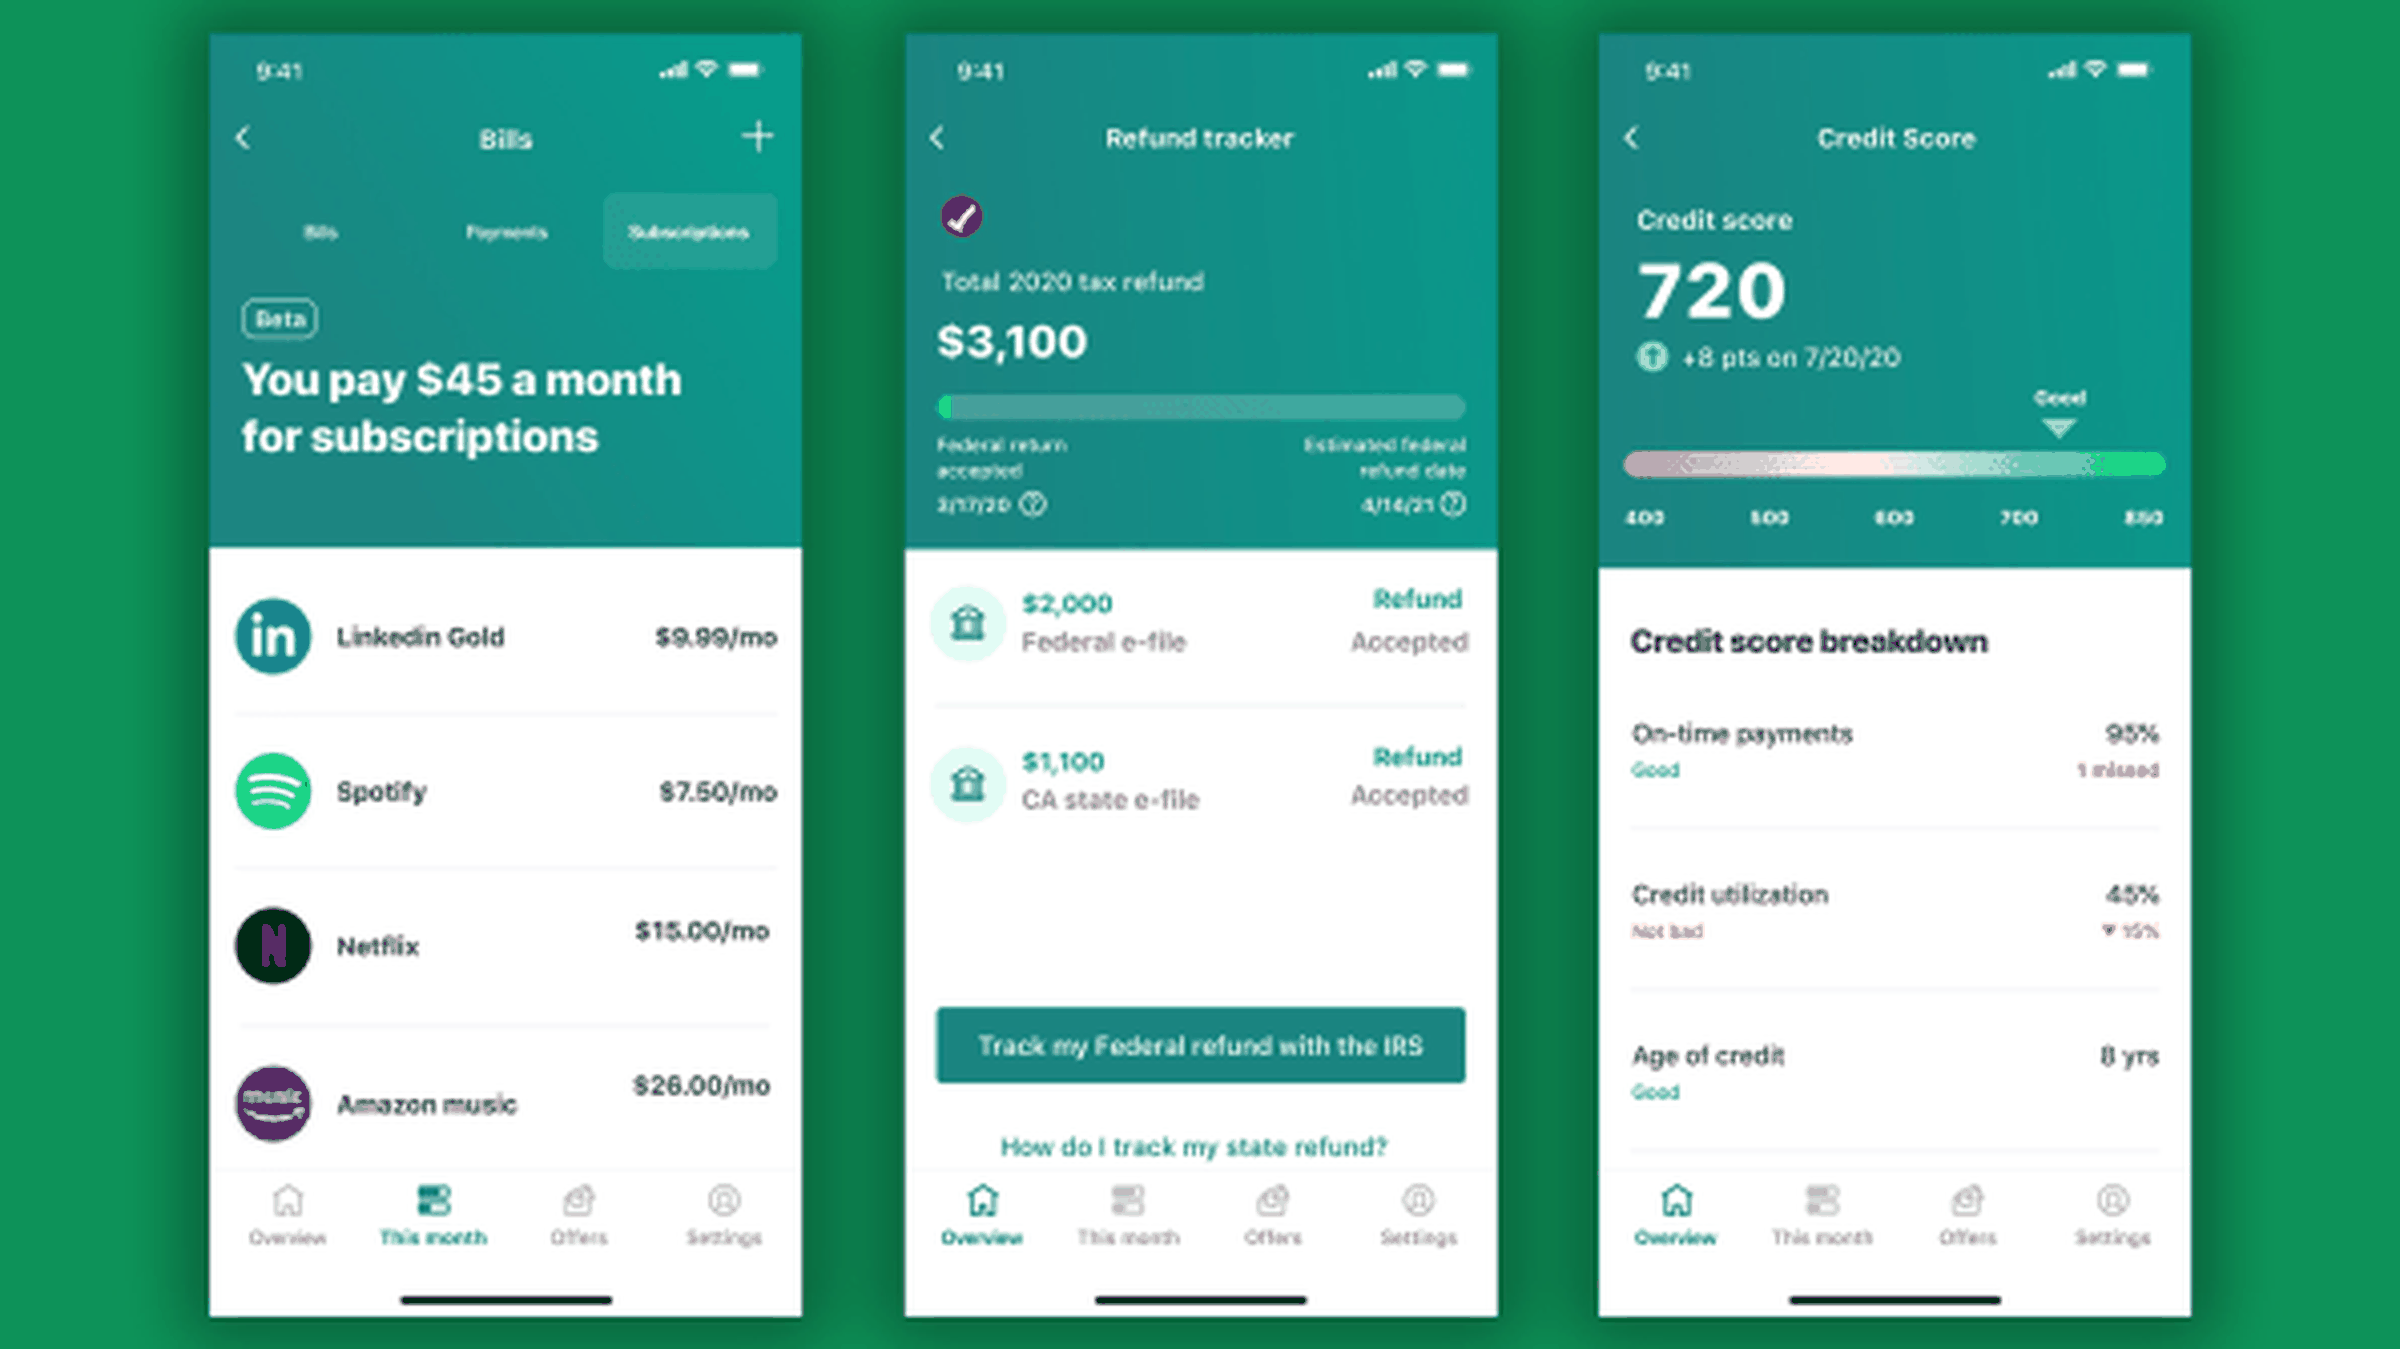 The updated Mint app for iPhone.